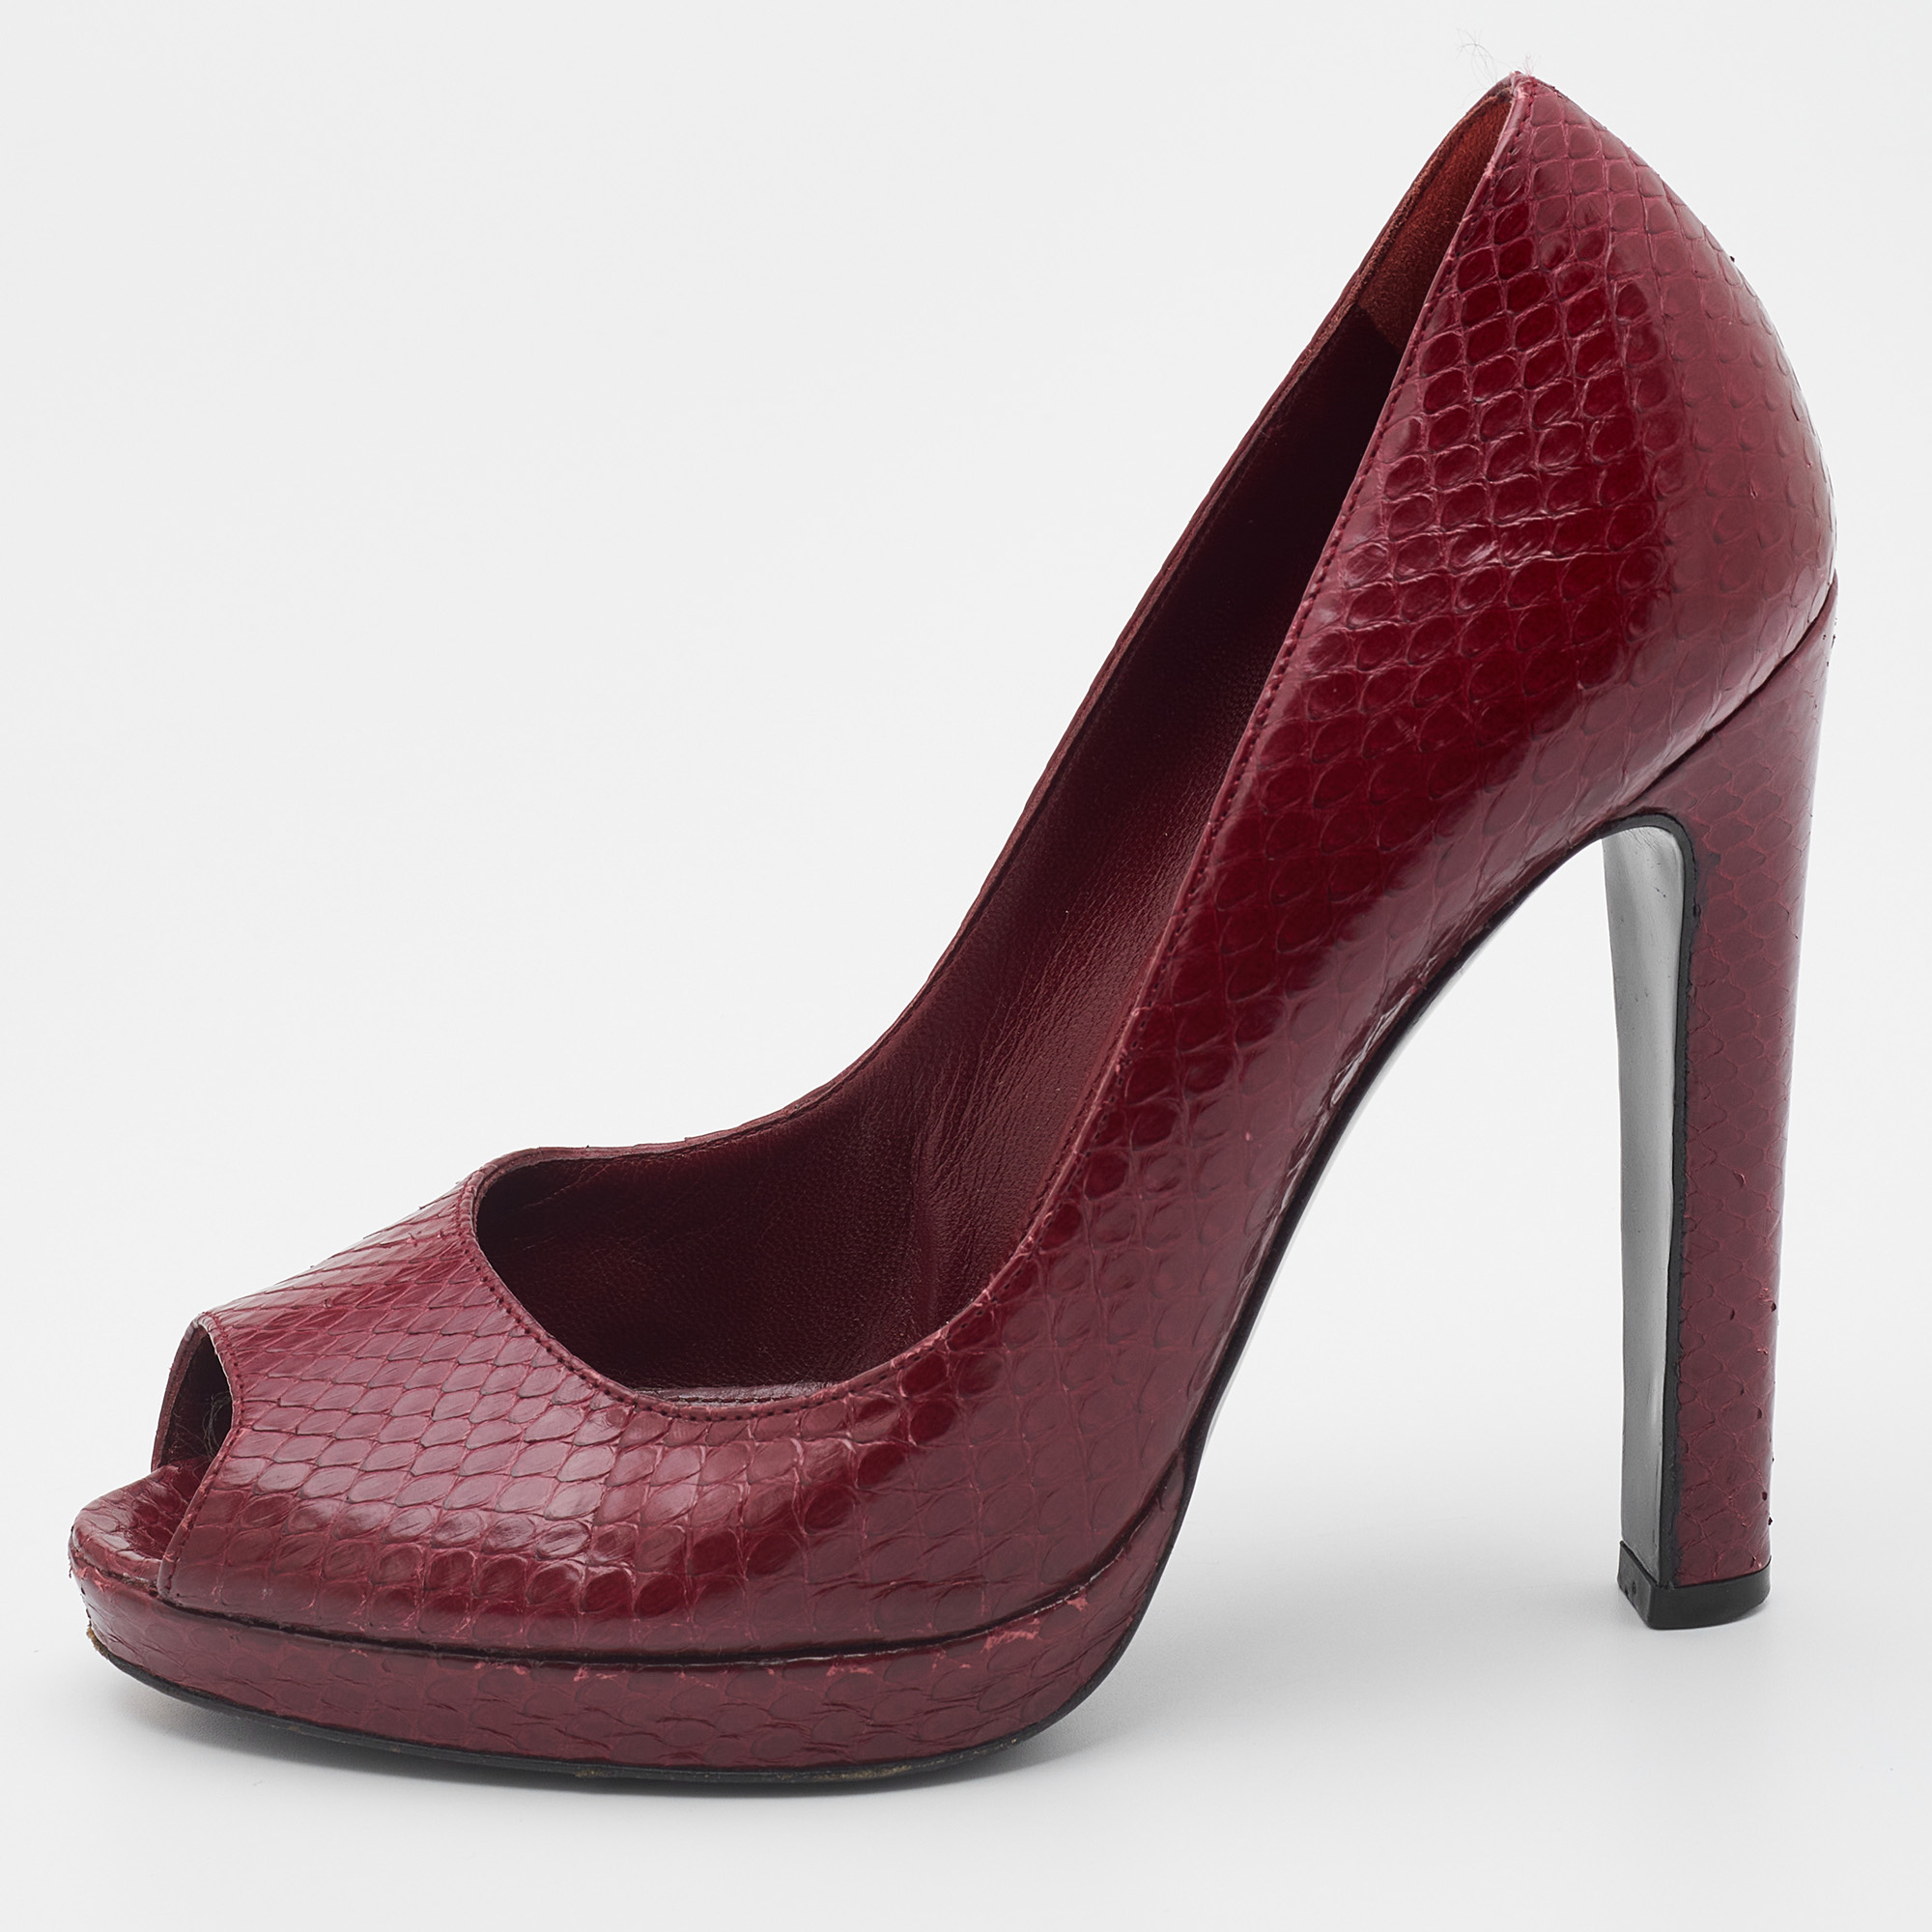 Pre-owned Sergio Rossi Dark Red Python Leather Peep Toe Pumps Size 36